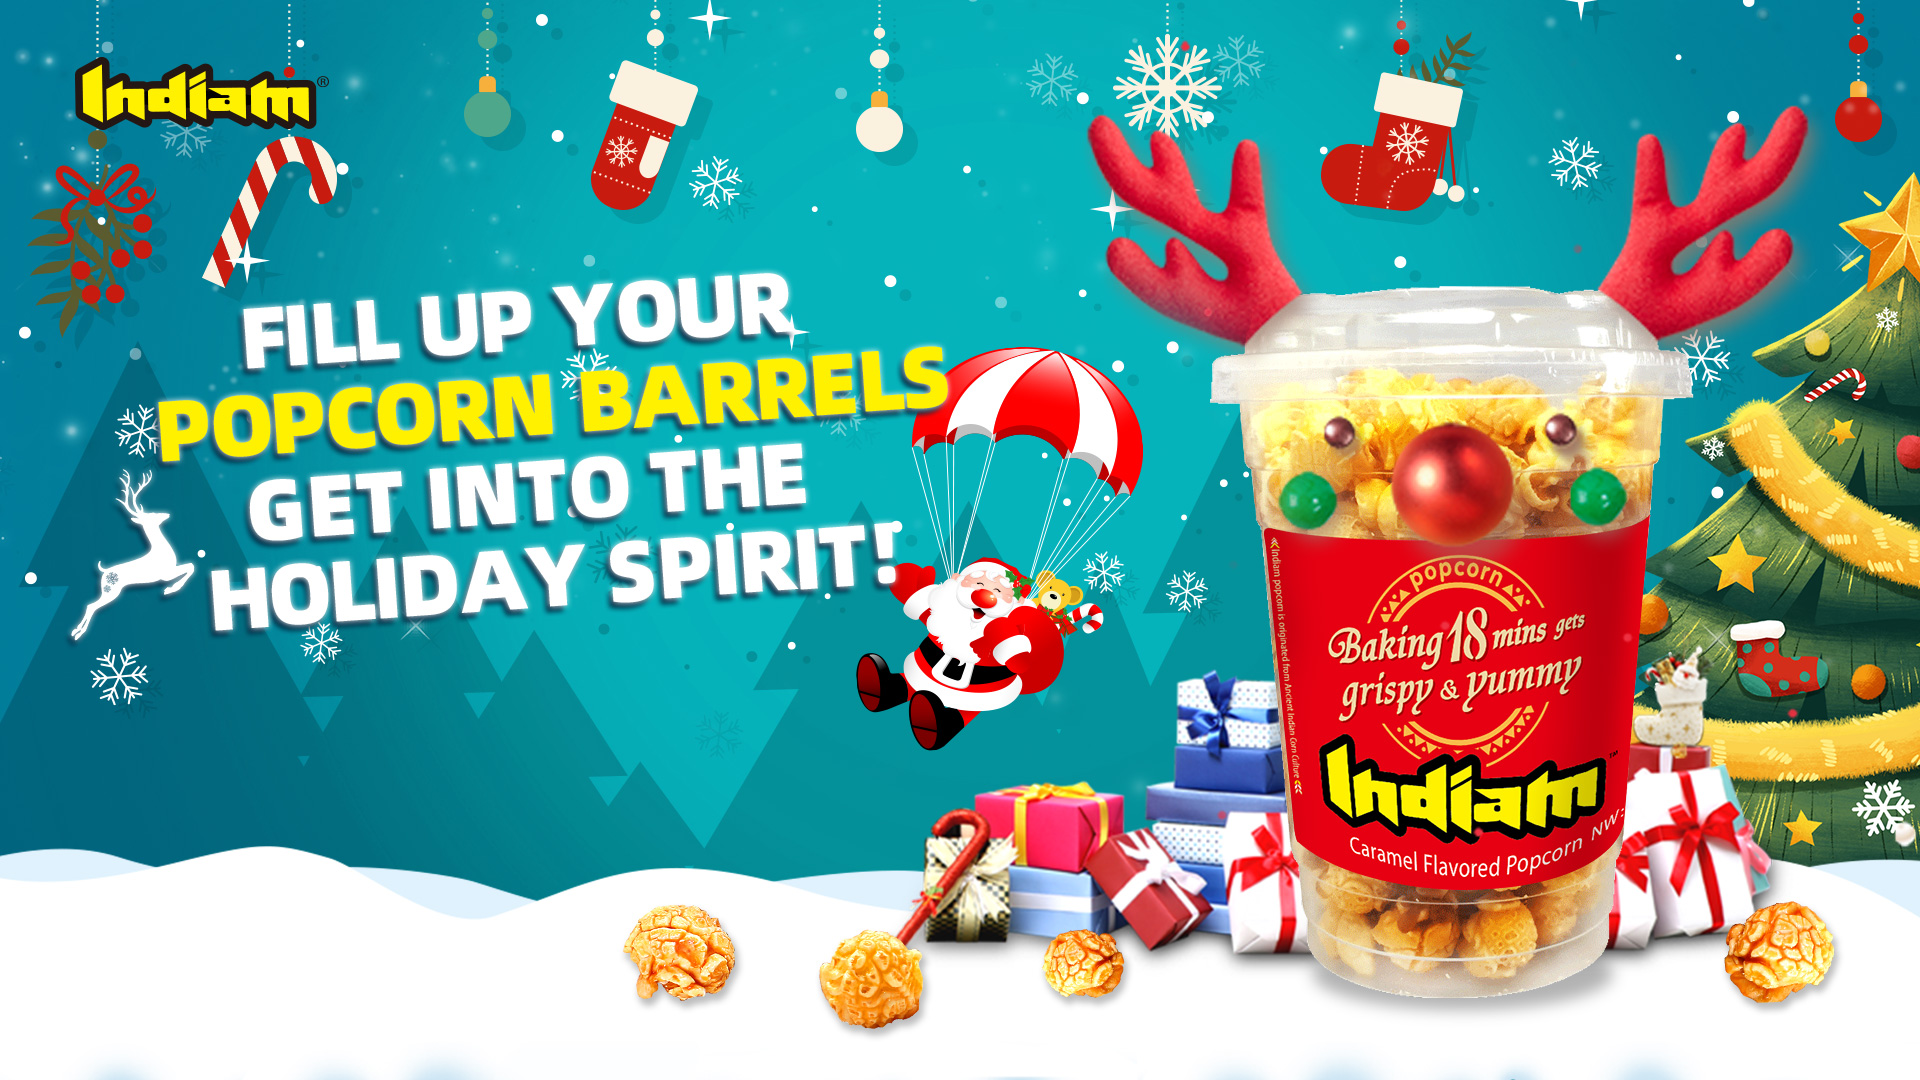 On the wonderful and happy holiday, by gifting your taste buds this very special gift